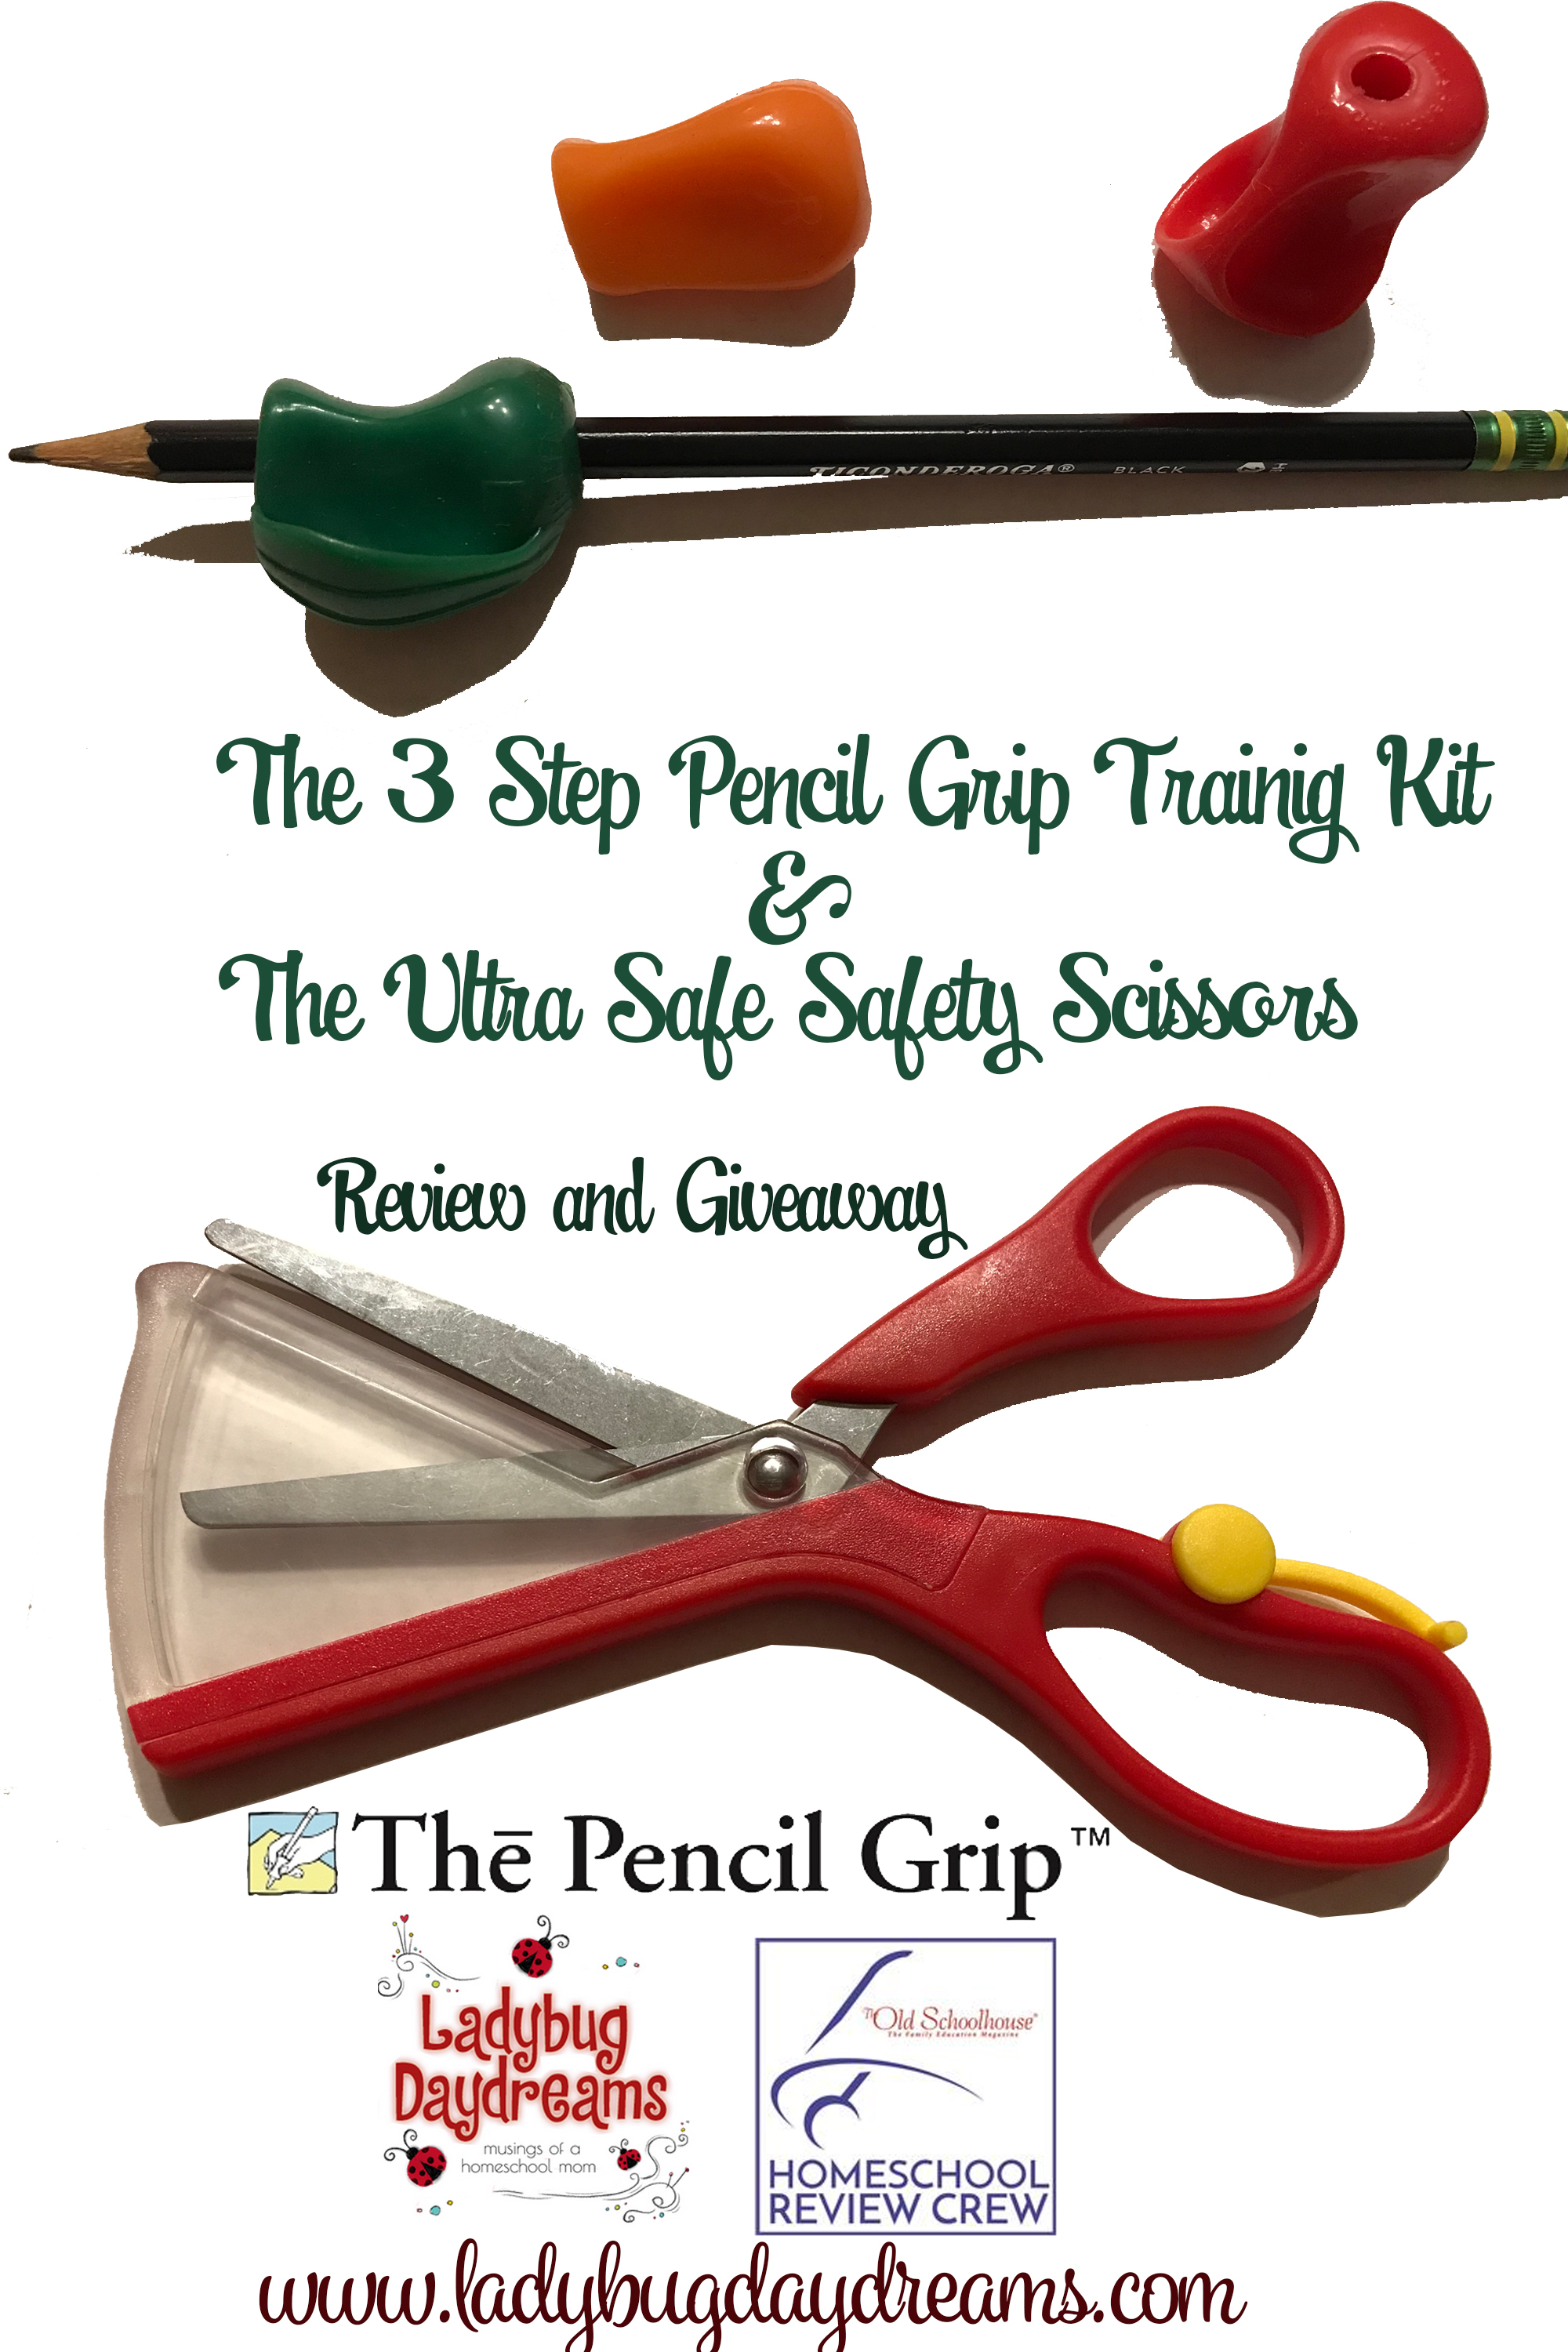 http://www.ladybugdaydreams.com/wp-content/uploads/2017/10/Pencil-Grips-and-Safety-Scissors-Giveaway.jpg